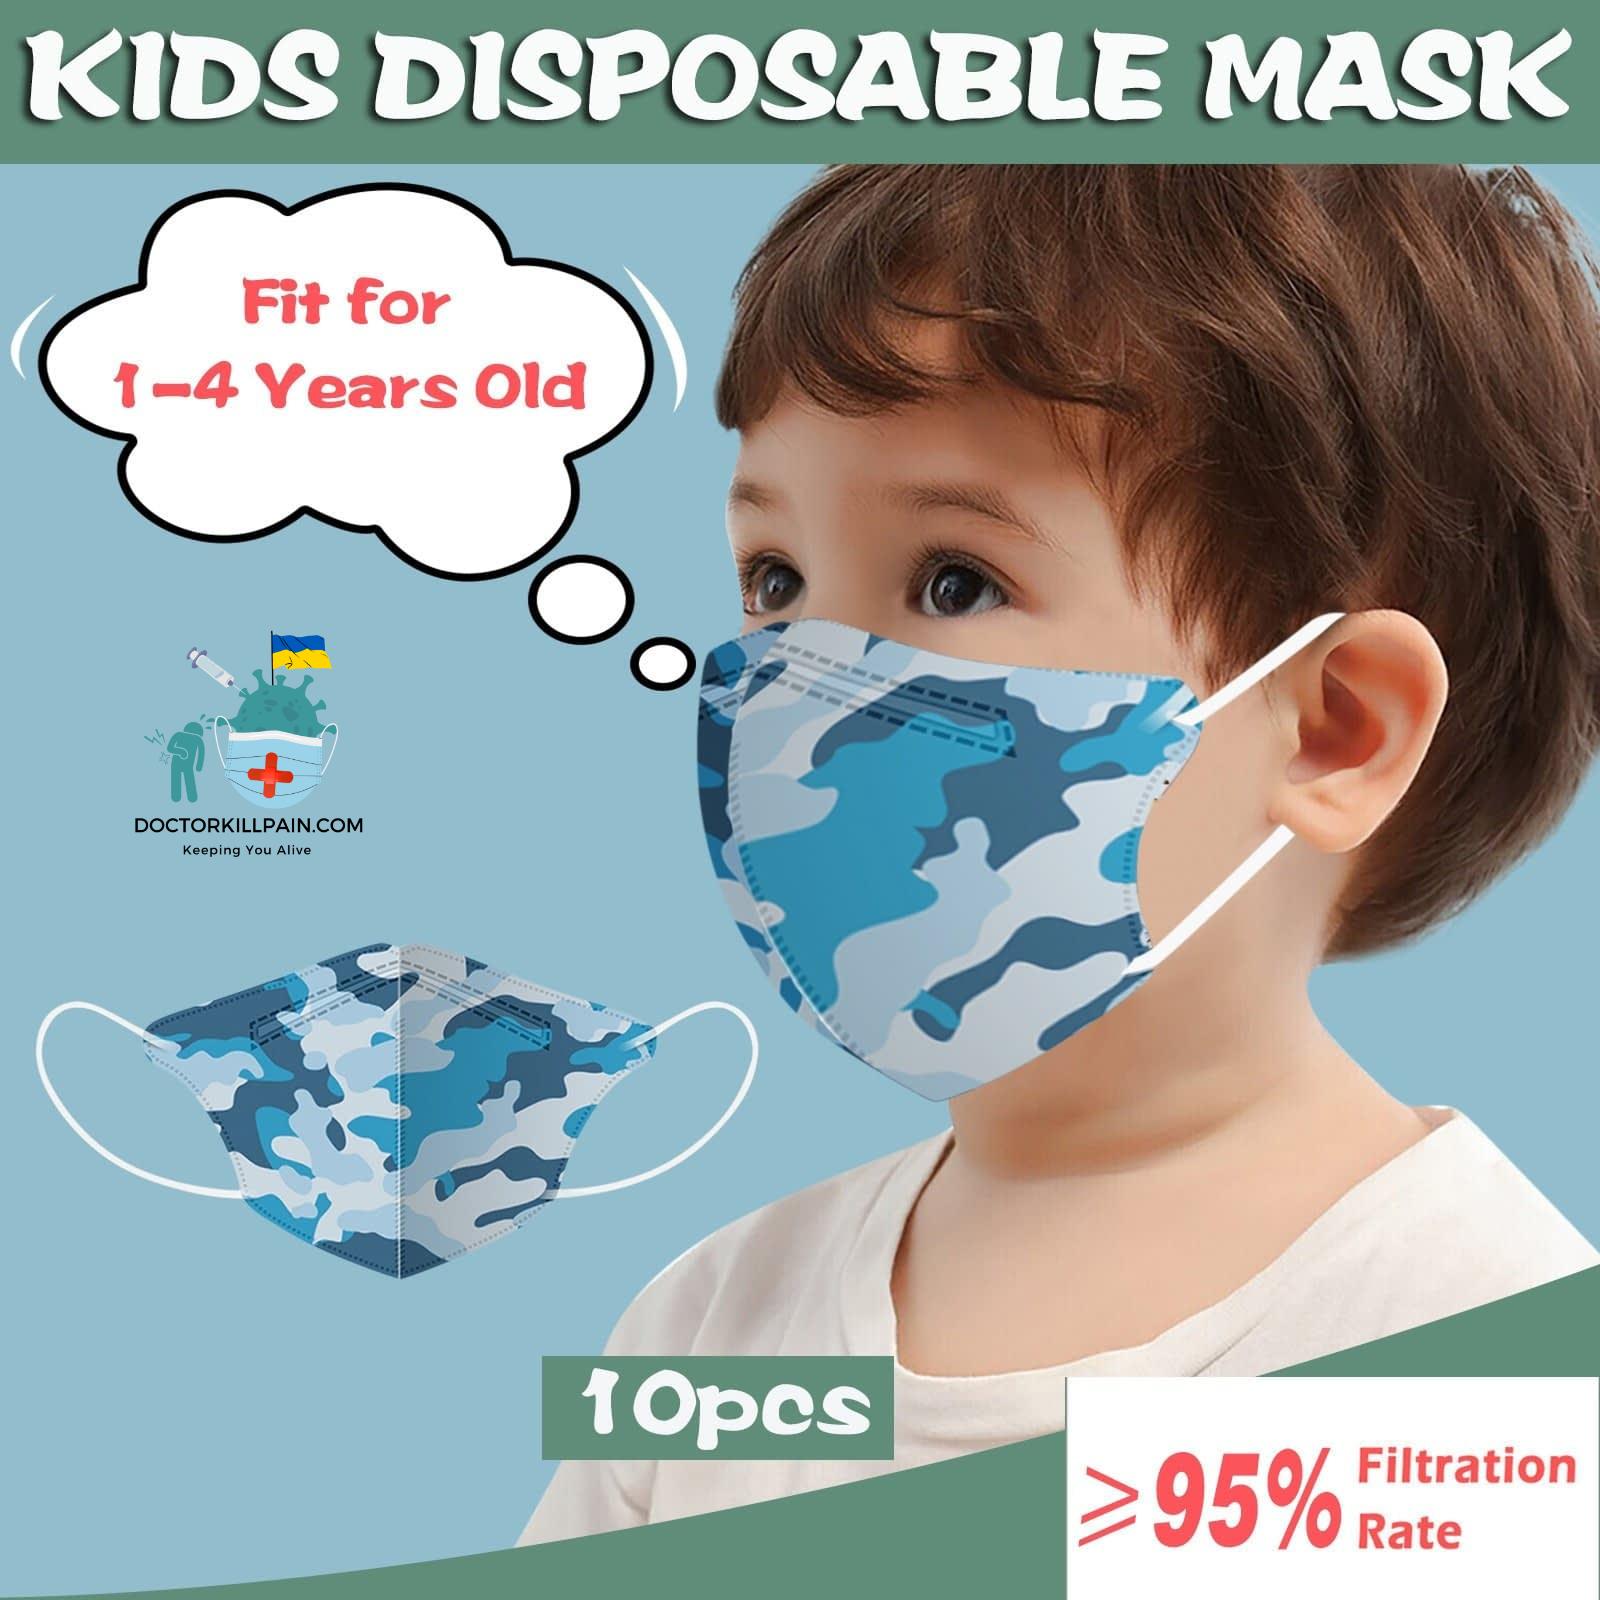 Day Care, Face Mask's 10PC Child Kids Disposable Mask Cartoon Printing Protection Face Mouth Mask Baby 3D Face Cover Facemask VIP Decoration